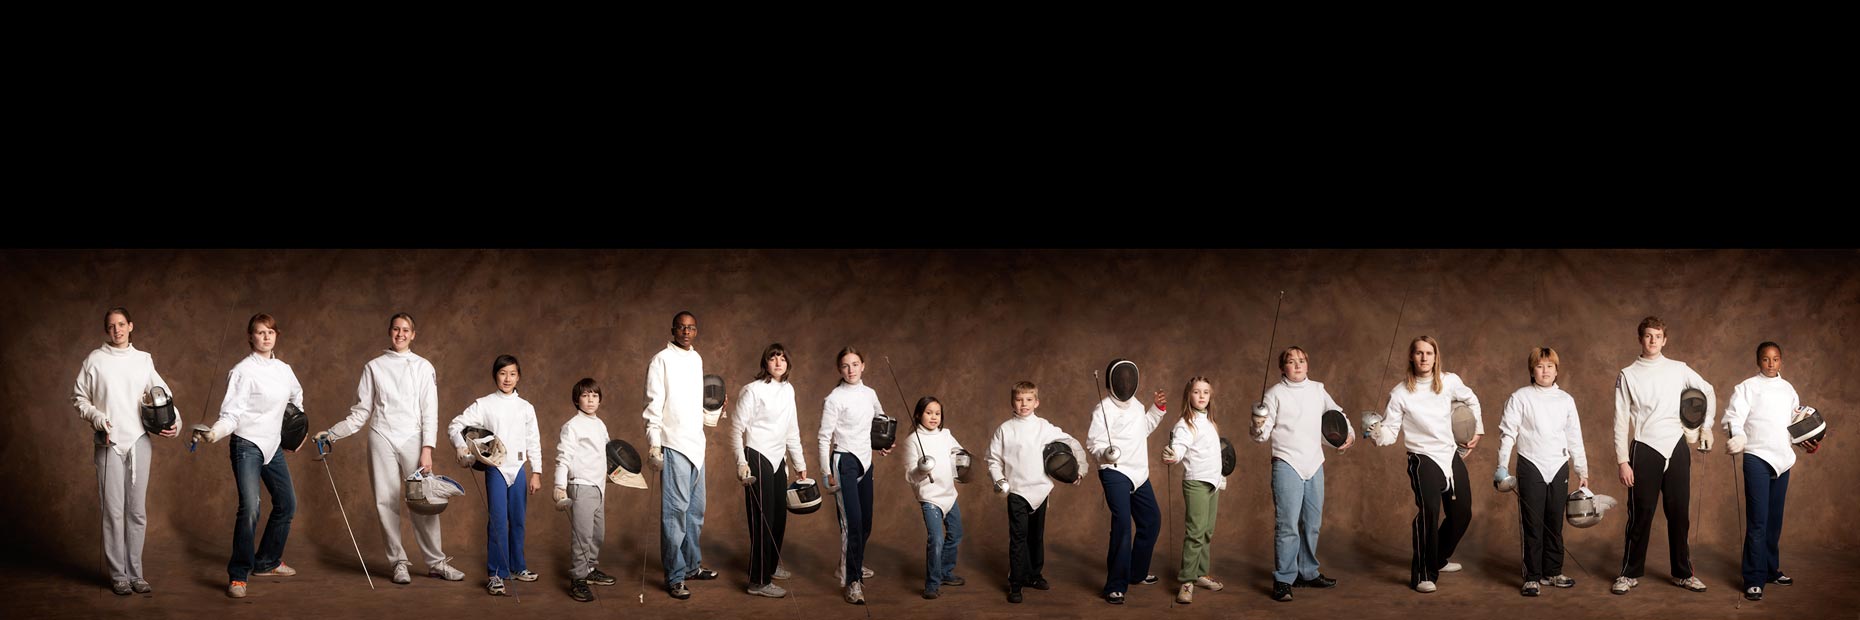 Fencing-Poster